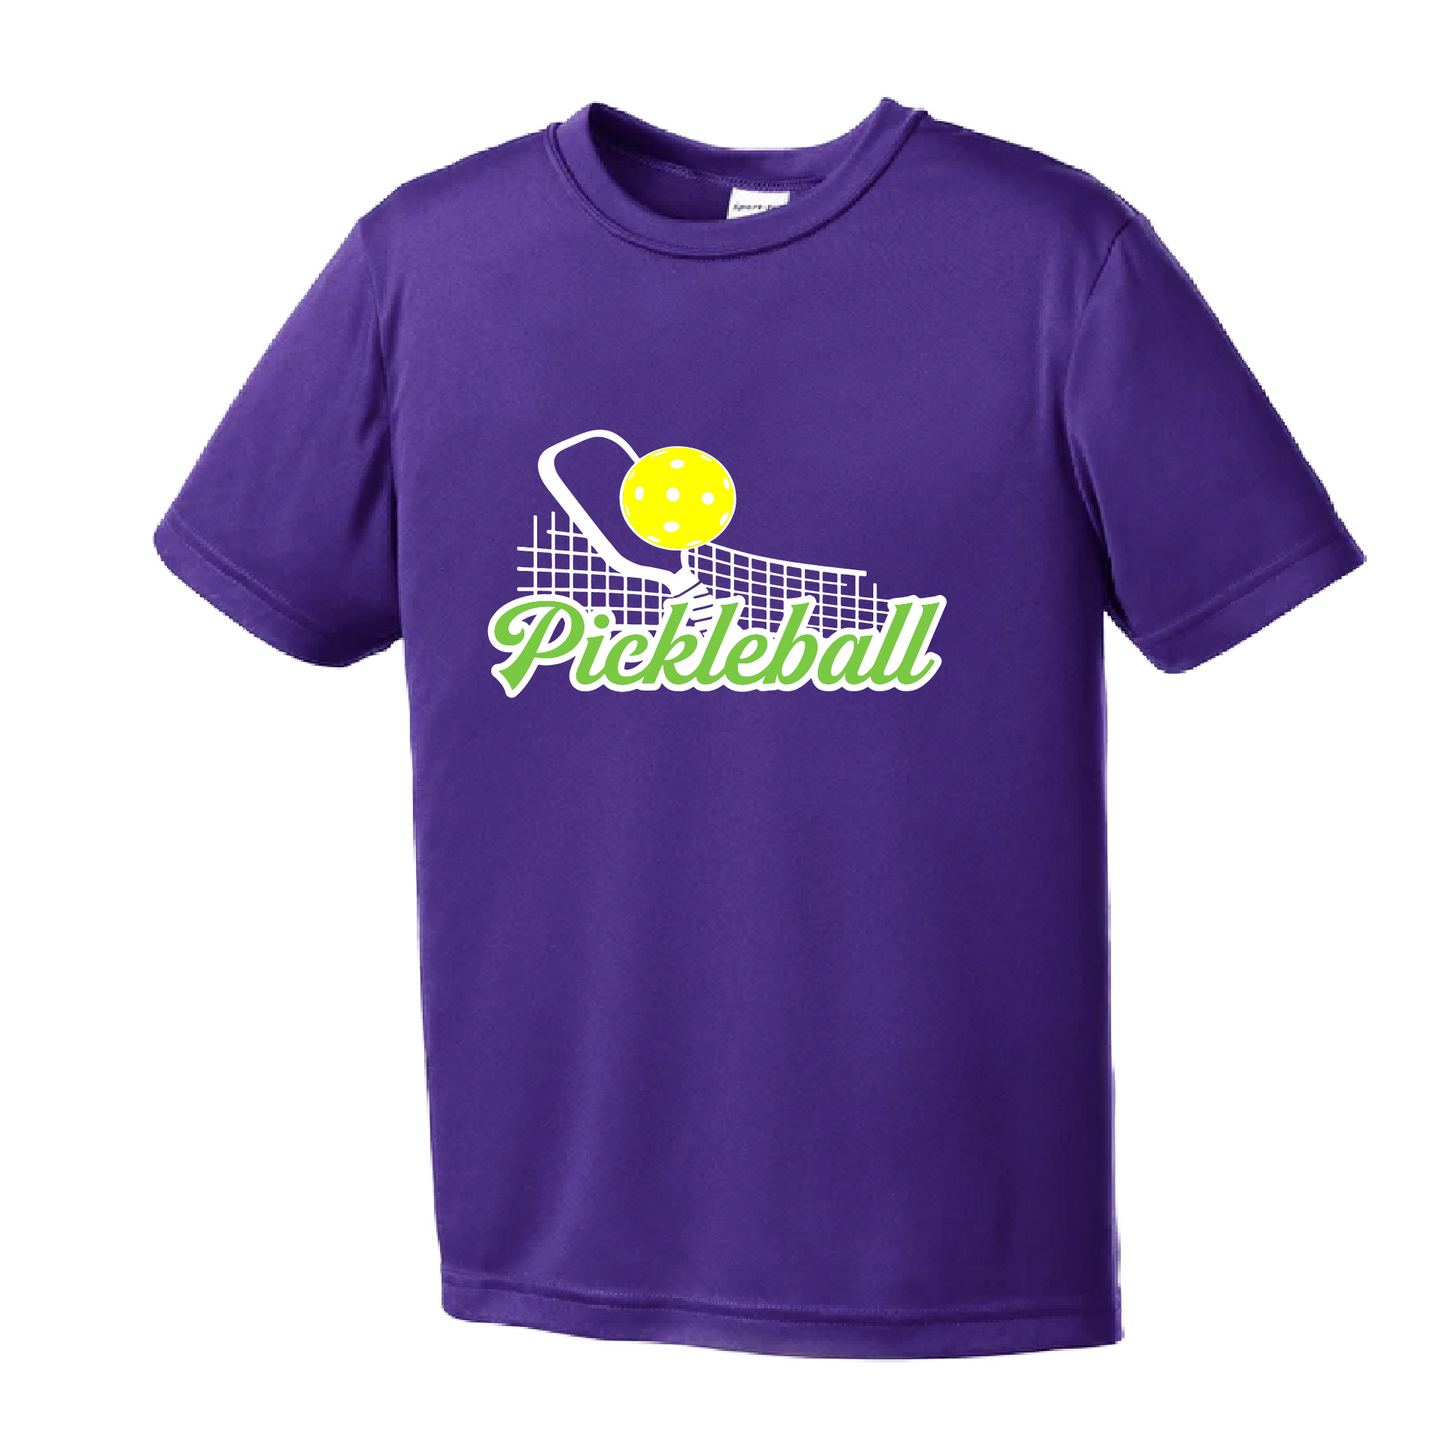 Pickleball Design: Pickleball with Net  Youth Style: Short Sleeve  Shirts are lightweight, roomy and highly breathable. These moisture-wicking shirts are designed for athletic performance. They feature PosiCharge technology to lock in color and prevent logos from fading. Removable tag and set-in sleeves for comfort.